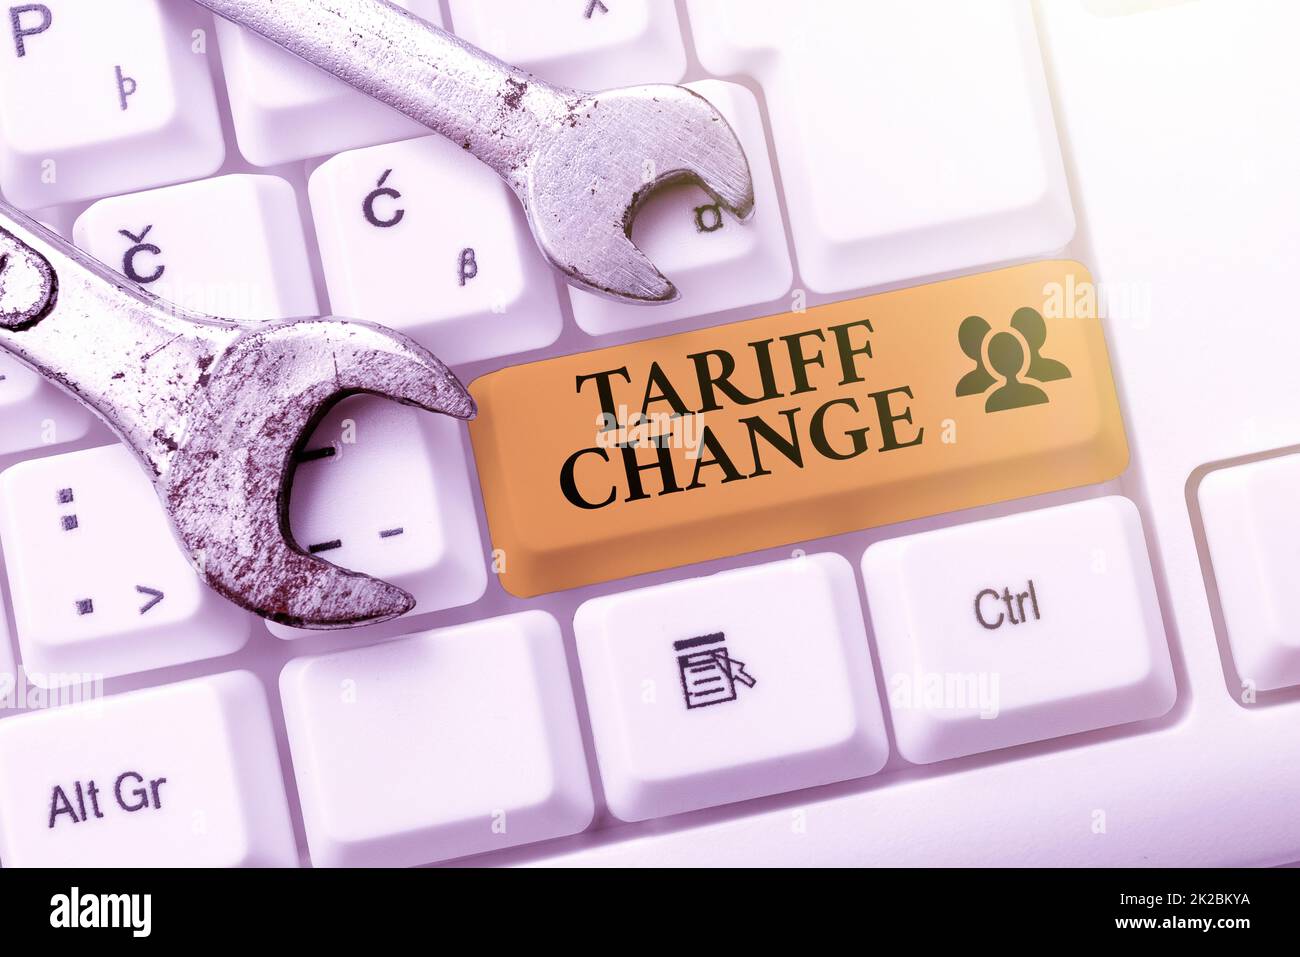 text-sign-showing-tariff-change-concept-meaning-amendment-of-import